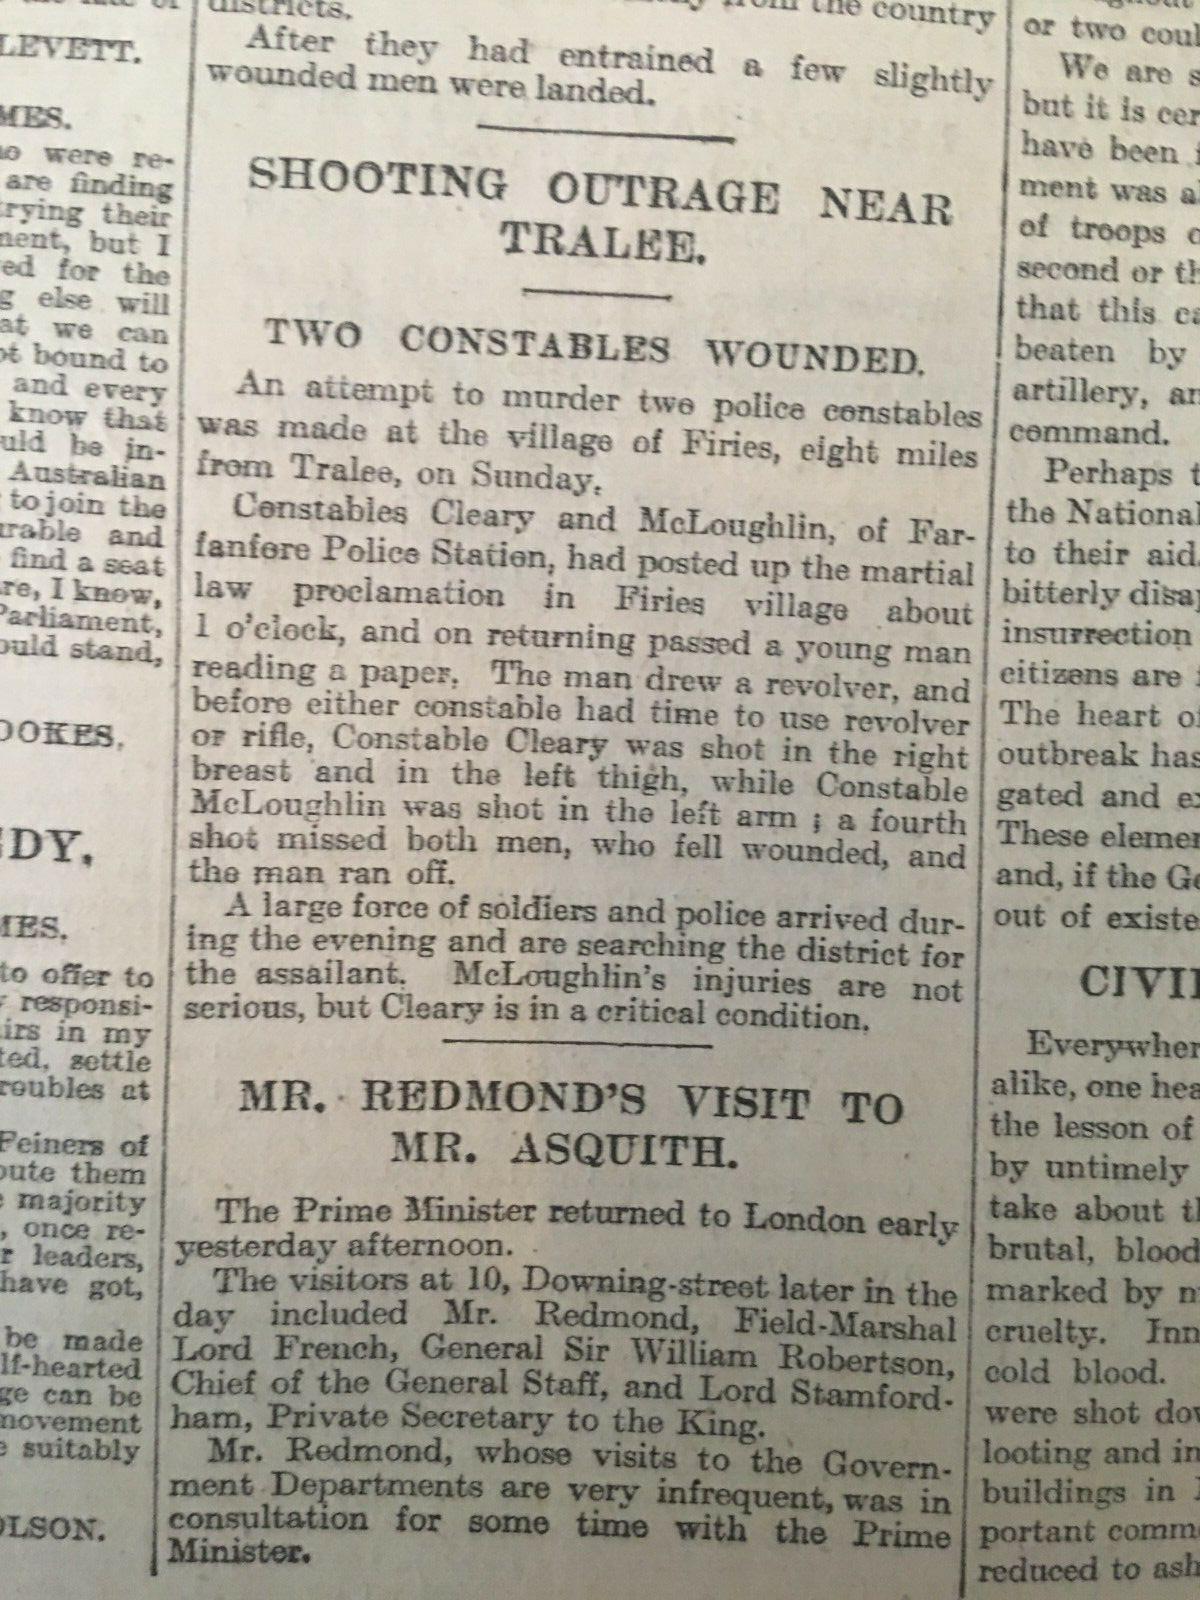 Easter Rising Rebellion 1916 Original Complete Newspaper 2nd May Images & Reports - Image 6 of 12